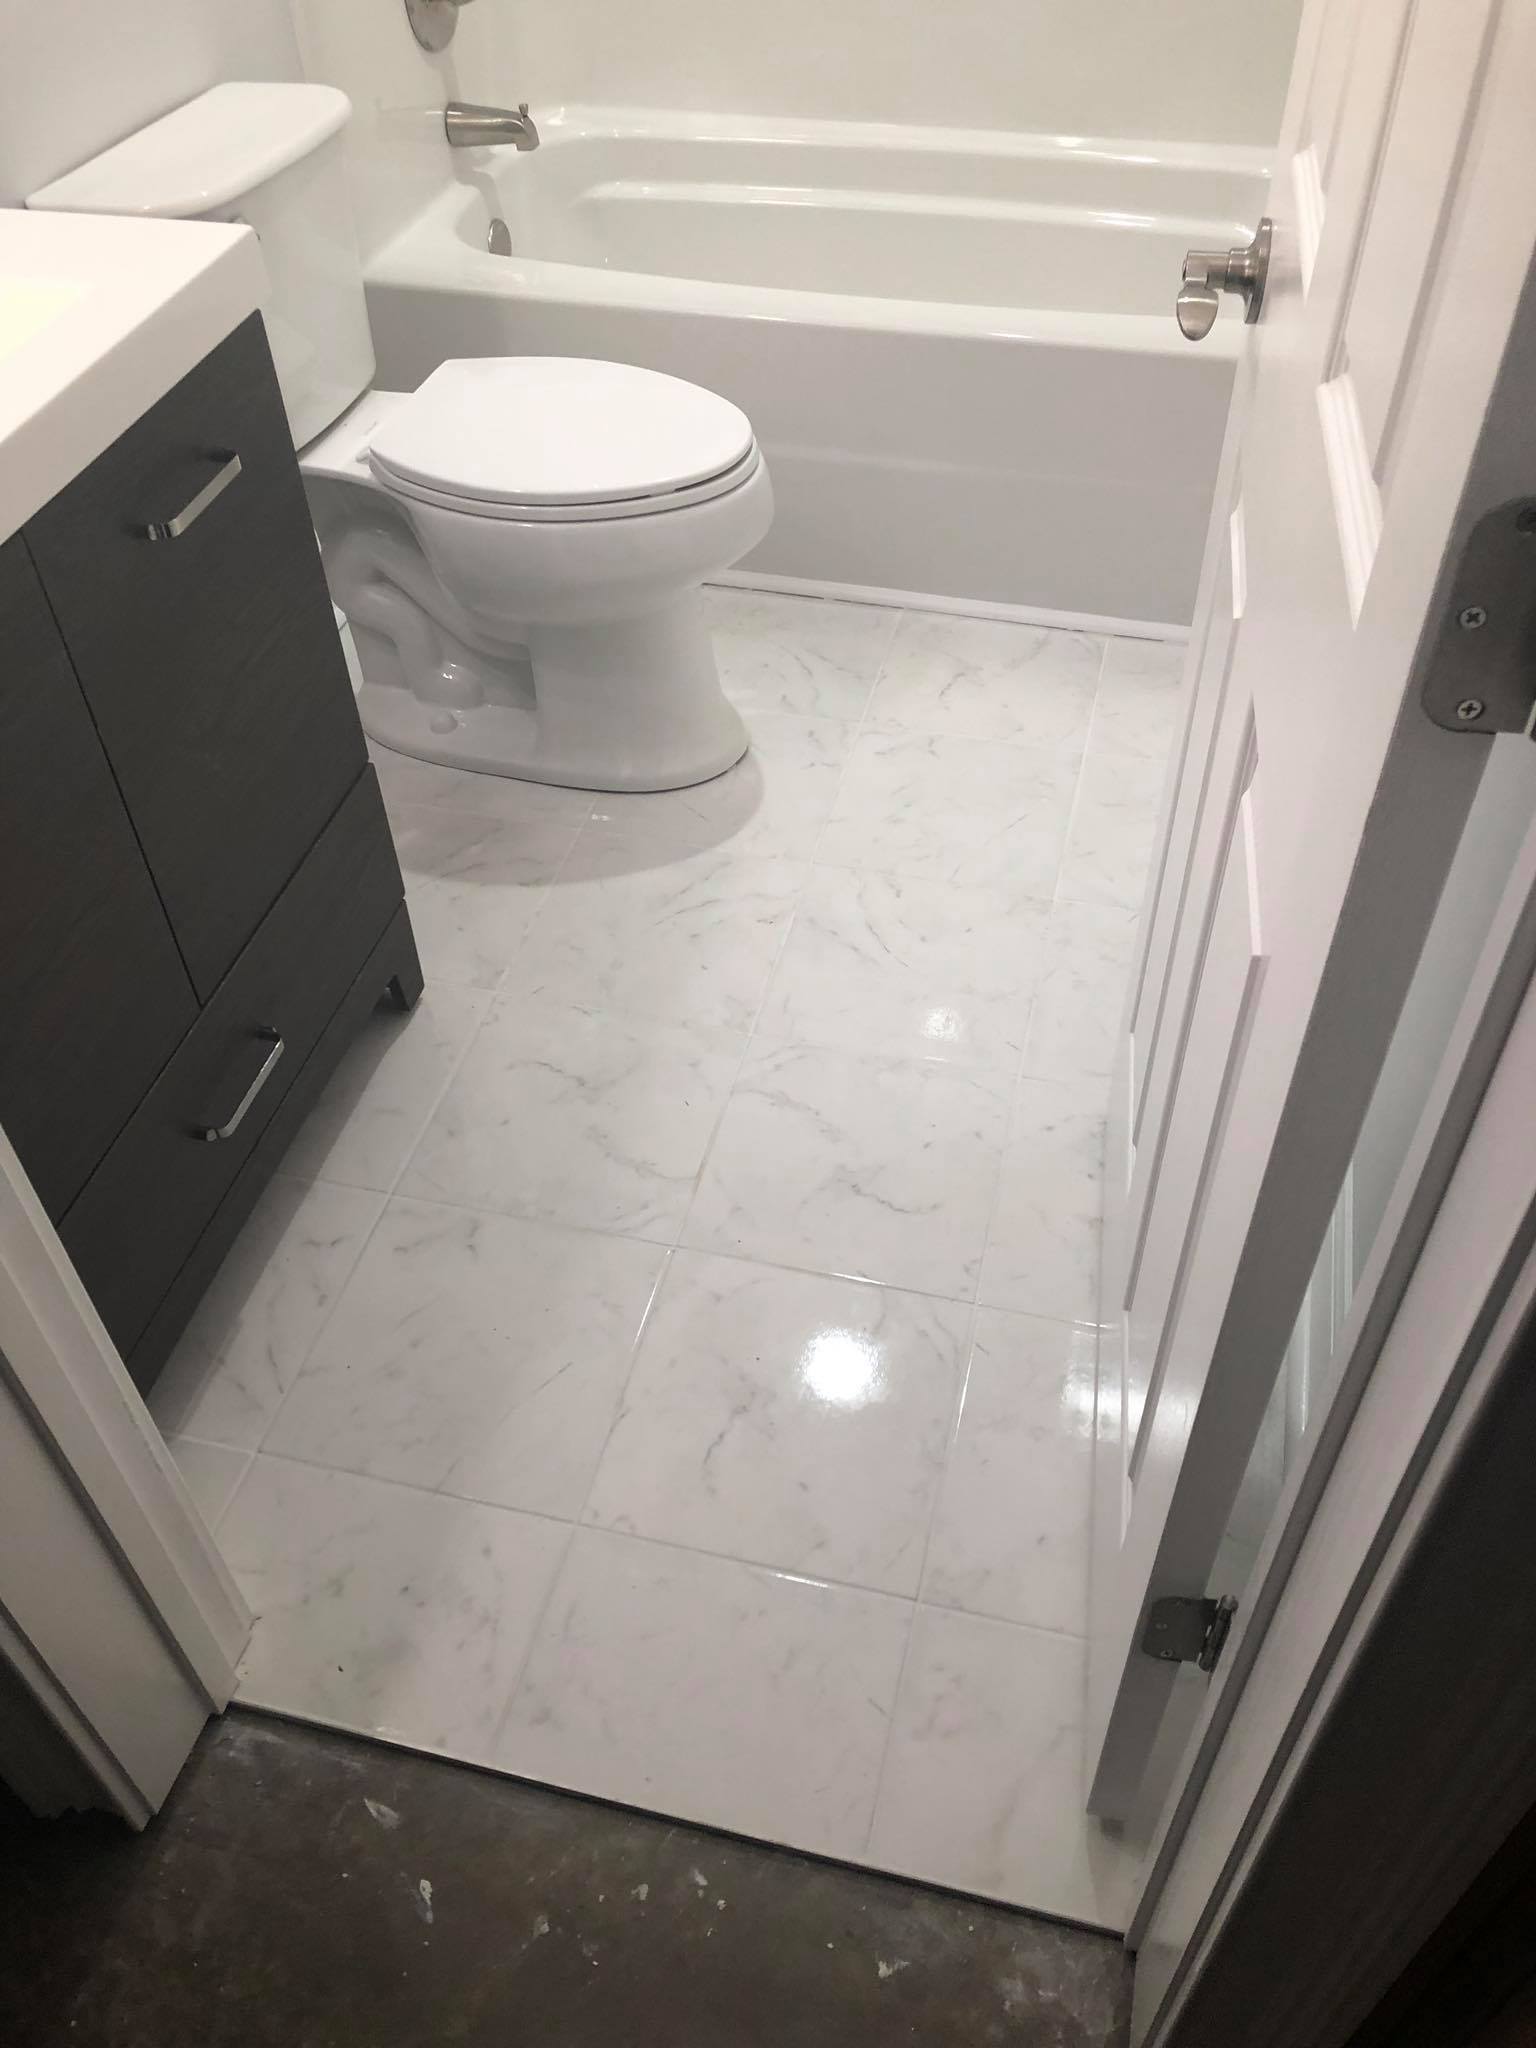 Completed Basement Bathroom Build and Installation with Vanity Tub and Shower